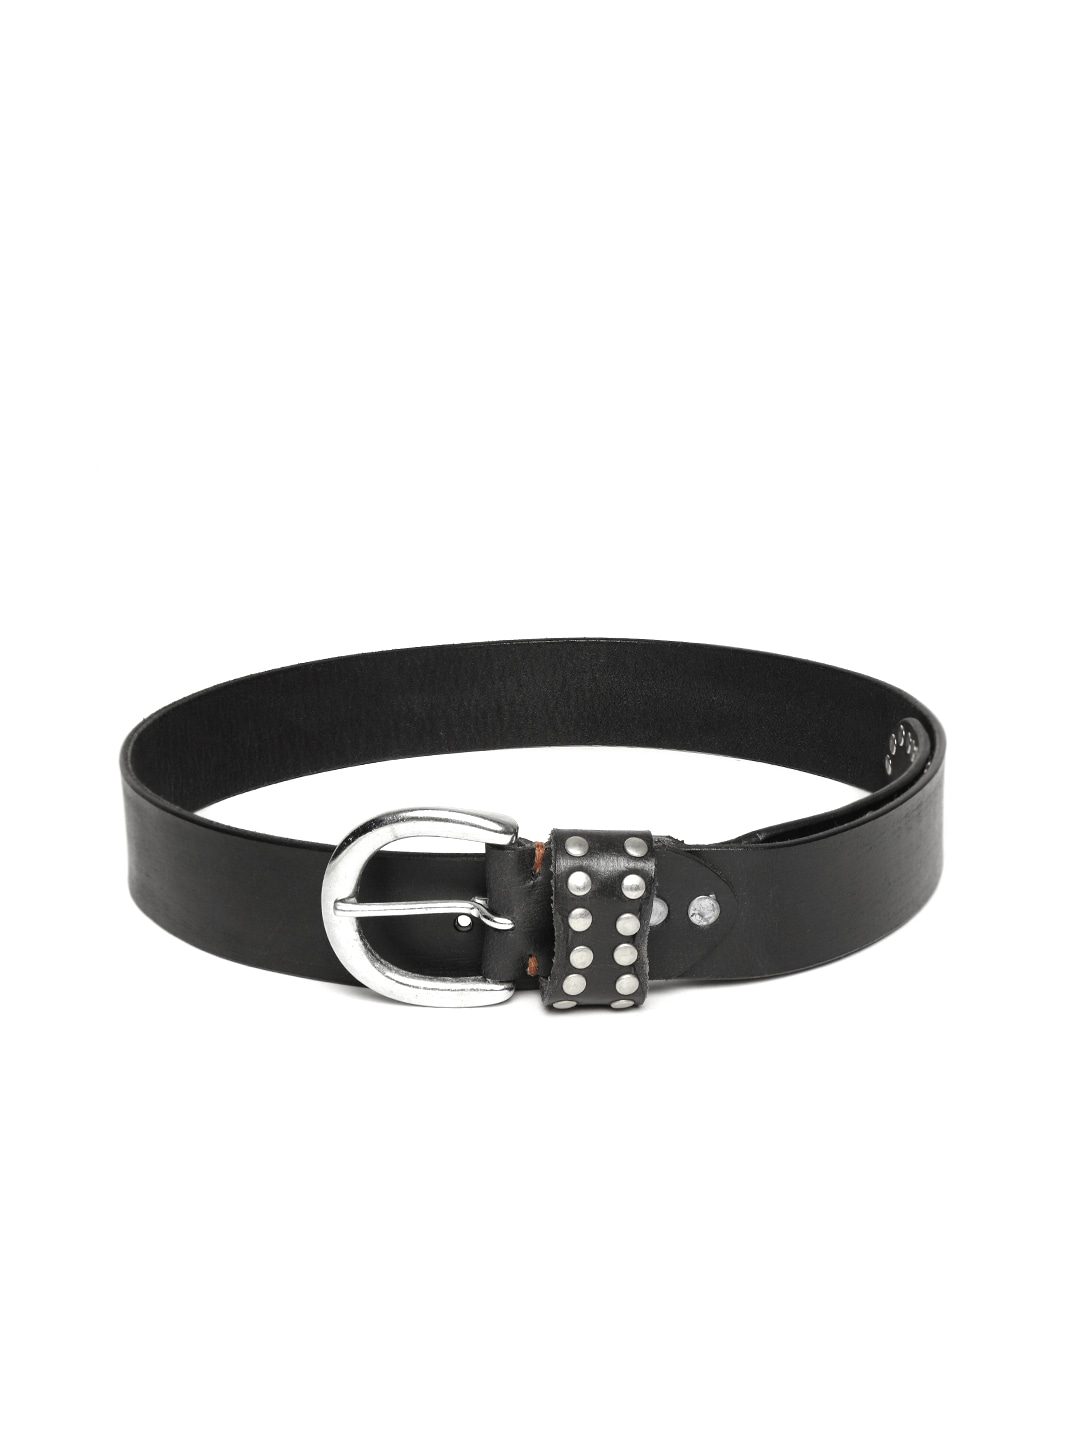 SASSAFRAS Women Black Solid Leather Belt with Studded Detail Price in India